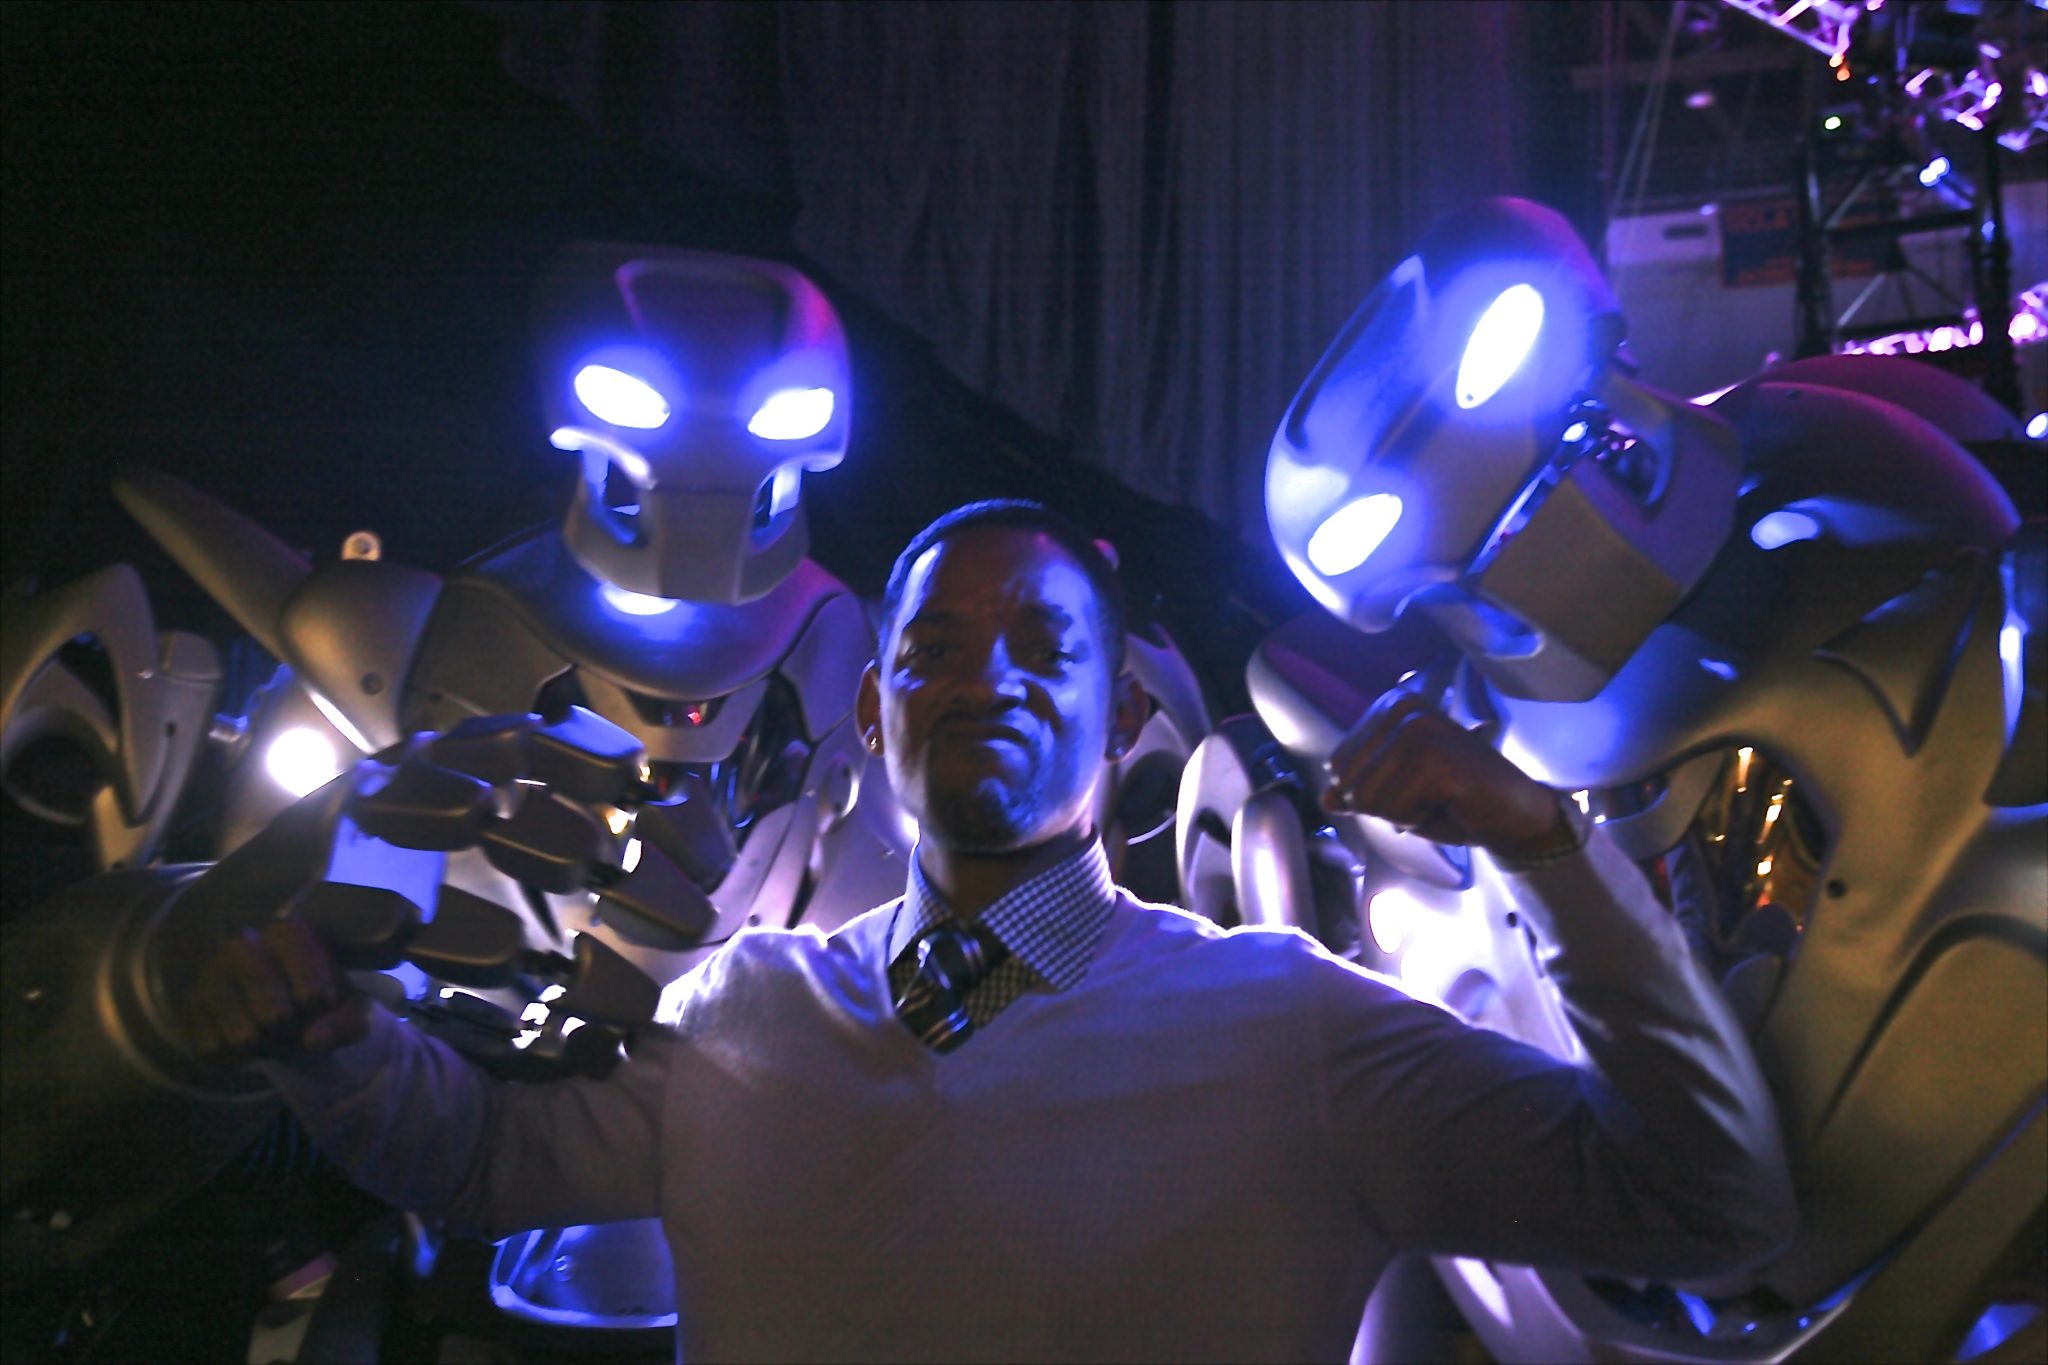 Will Smith with Titan the Robot backstage at the Kids Choice Awards, Los Angeles, USA.